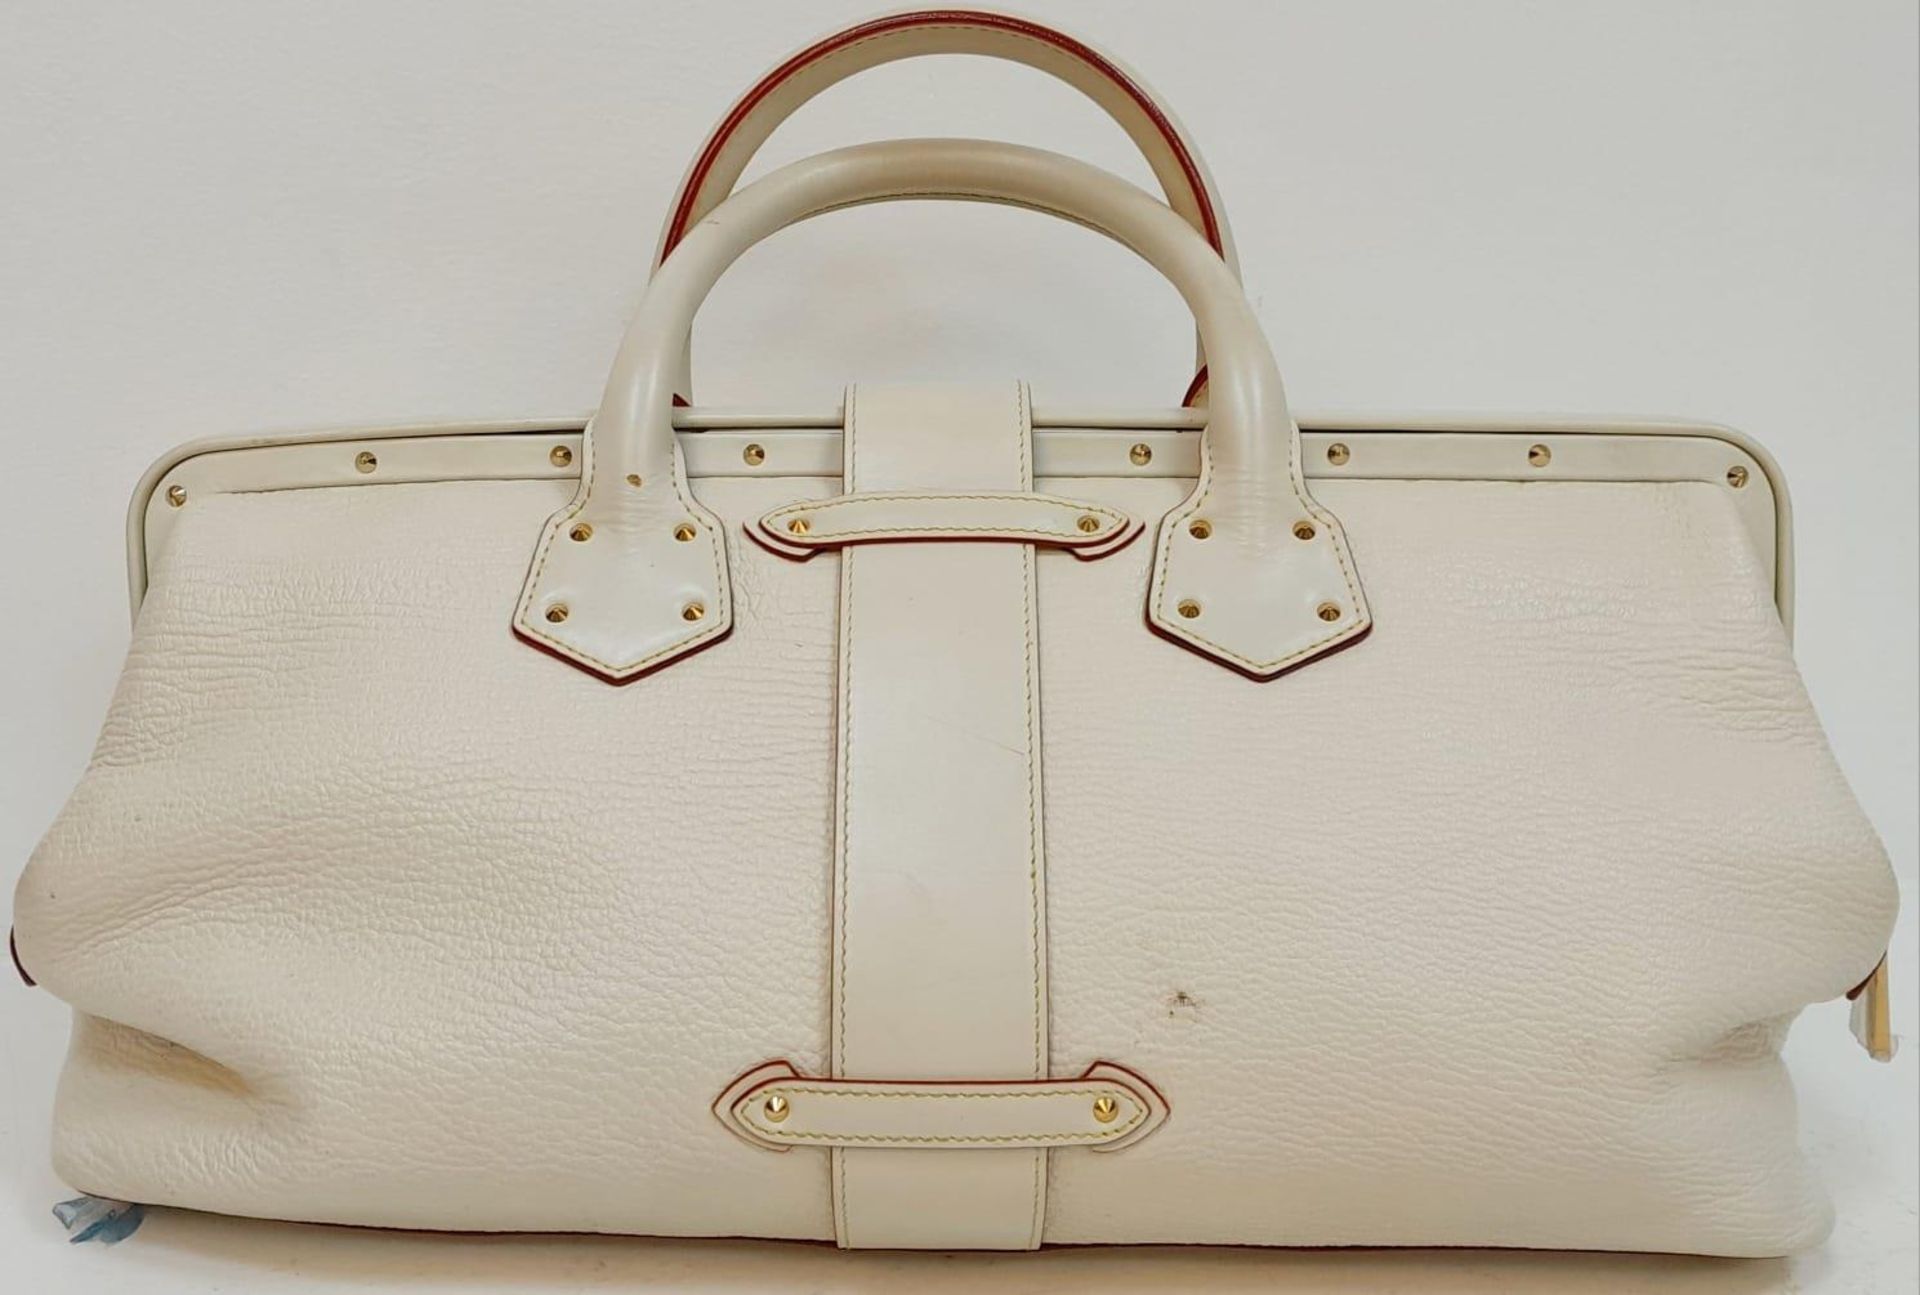 A Louis Vuitton Manhattan PM Suhali Leather Handbag. Soft white textured leather exterior with - Image 3 of 9